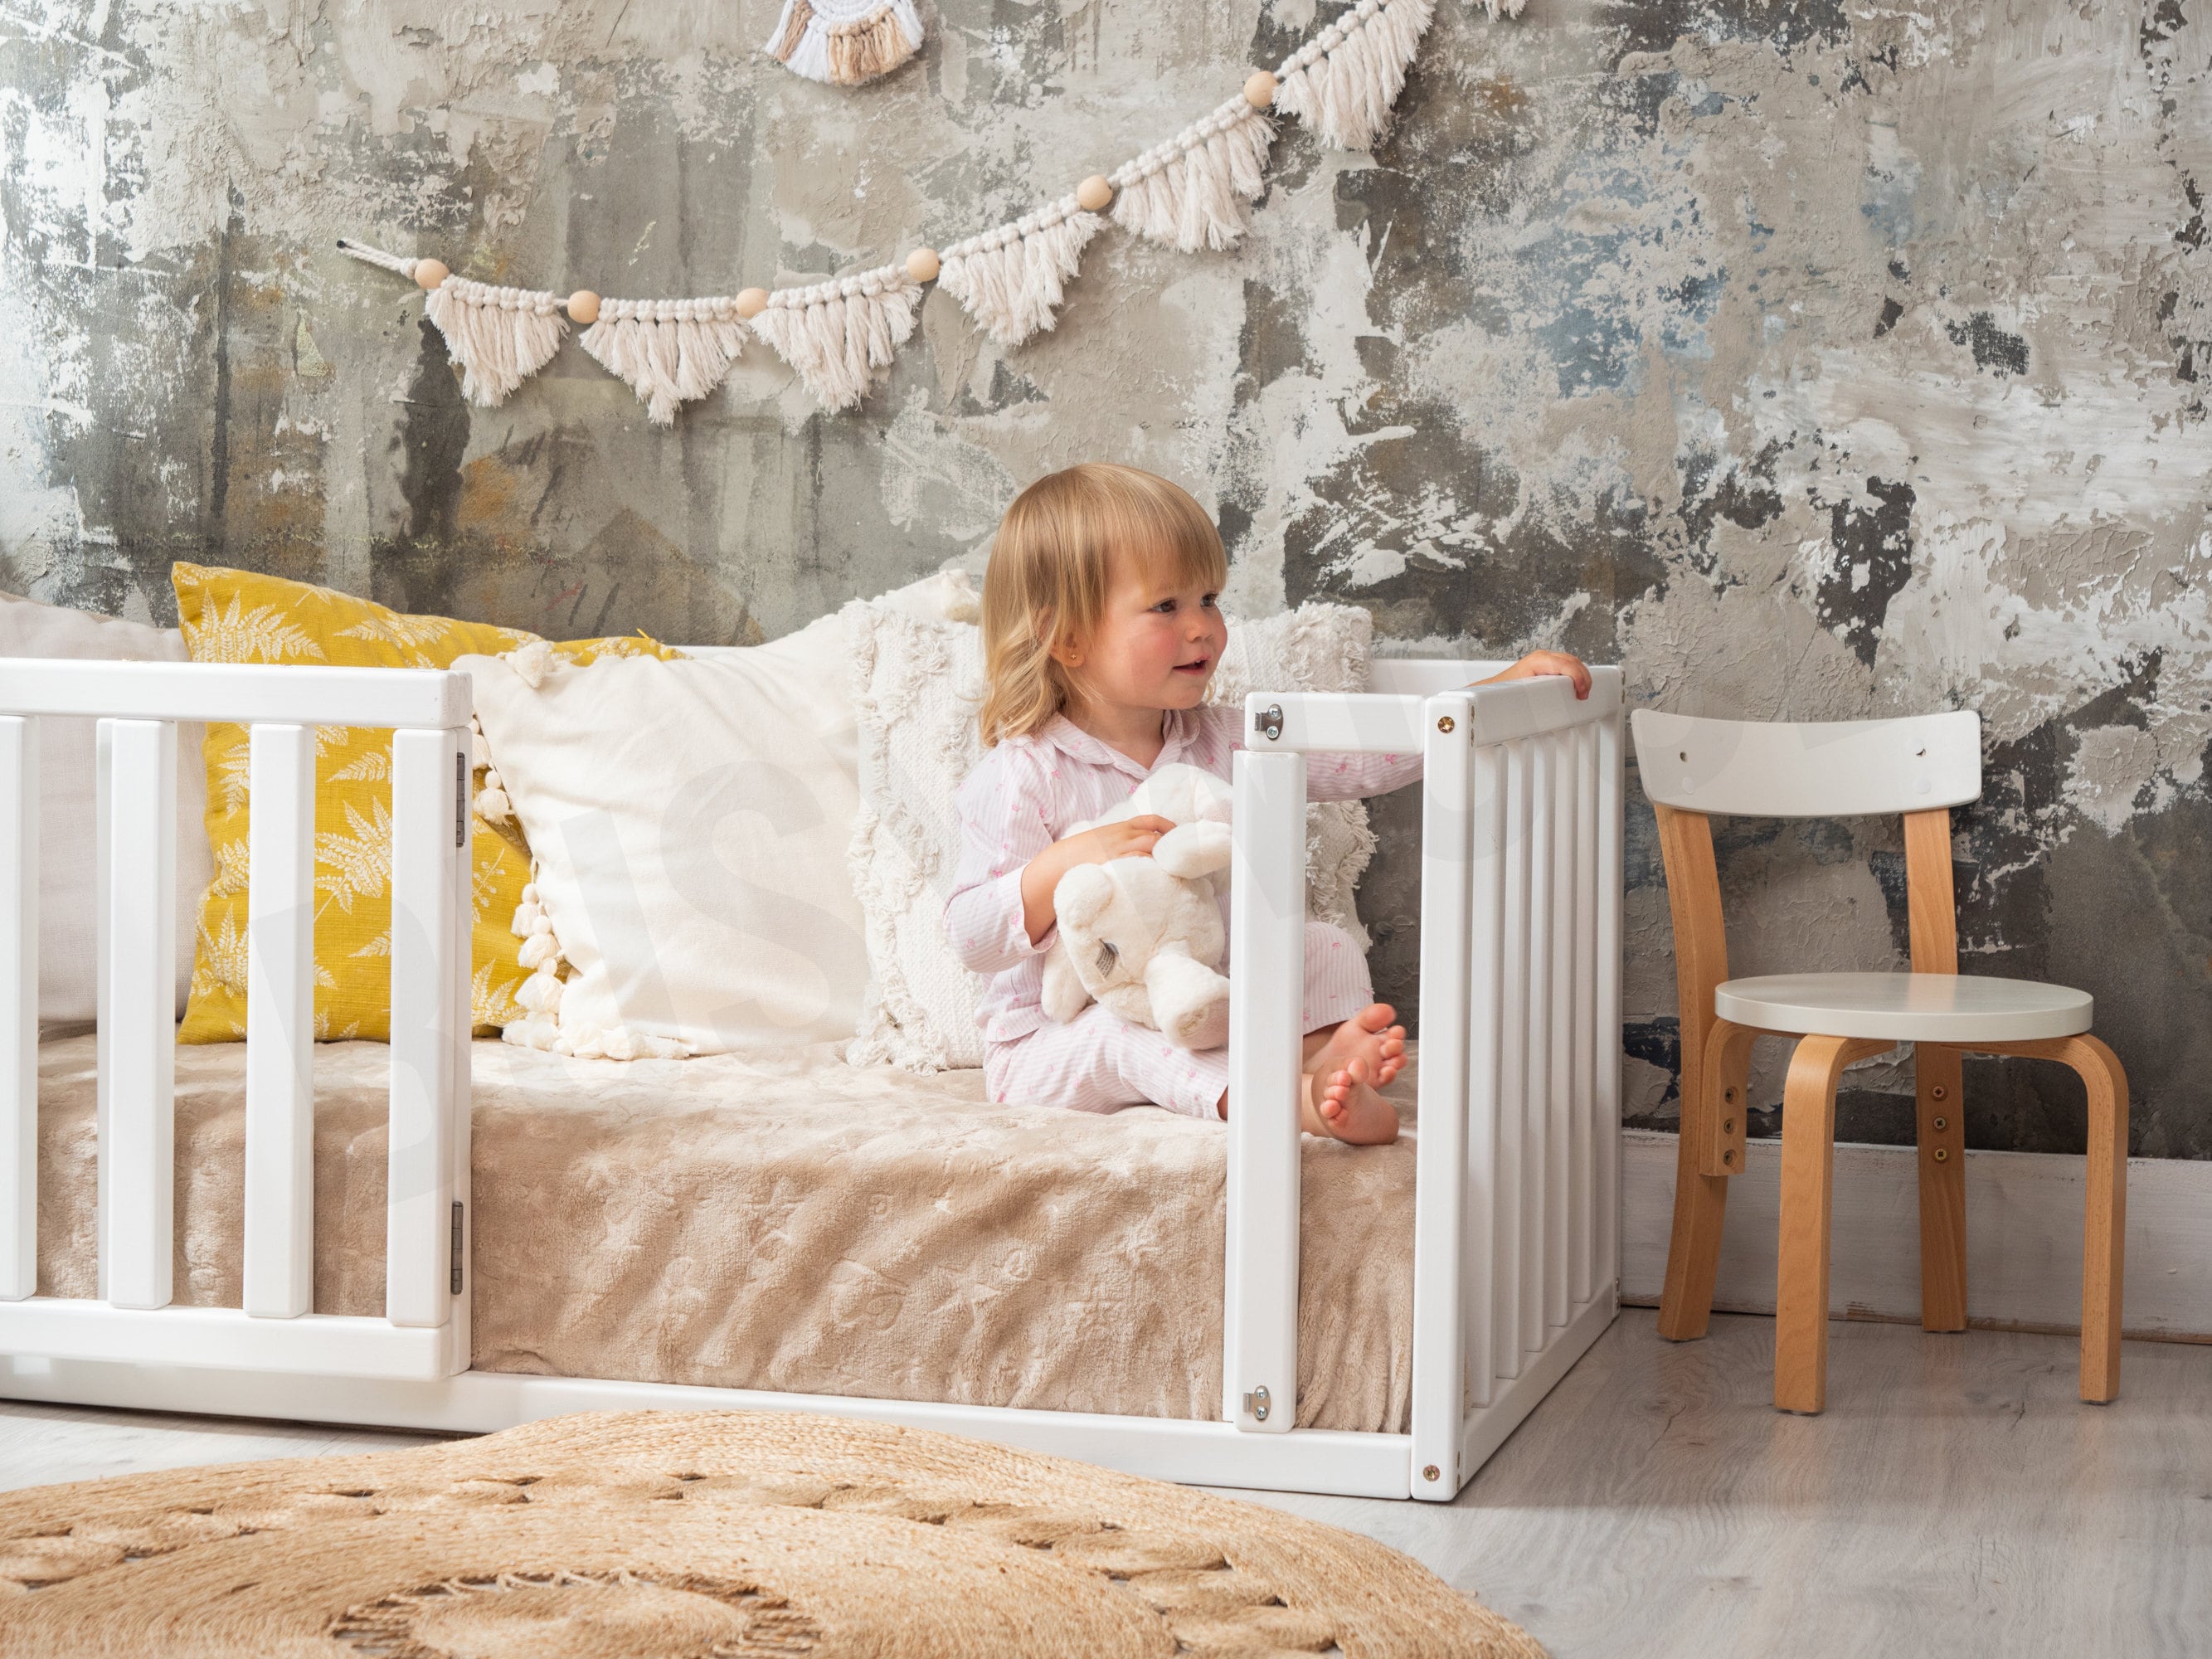 Bed With Extra Protection, Nursery Bed, Toddler Pen, Play Bed, Solid Wood  Bed, Nursery Decor, Ecofriendly Furniture 